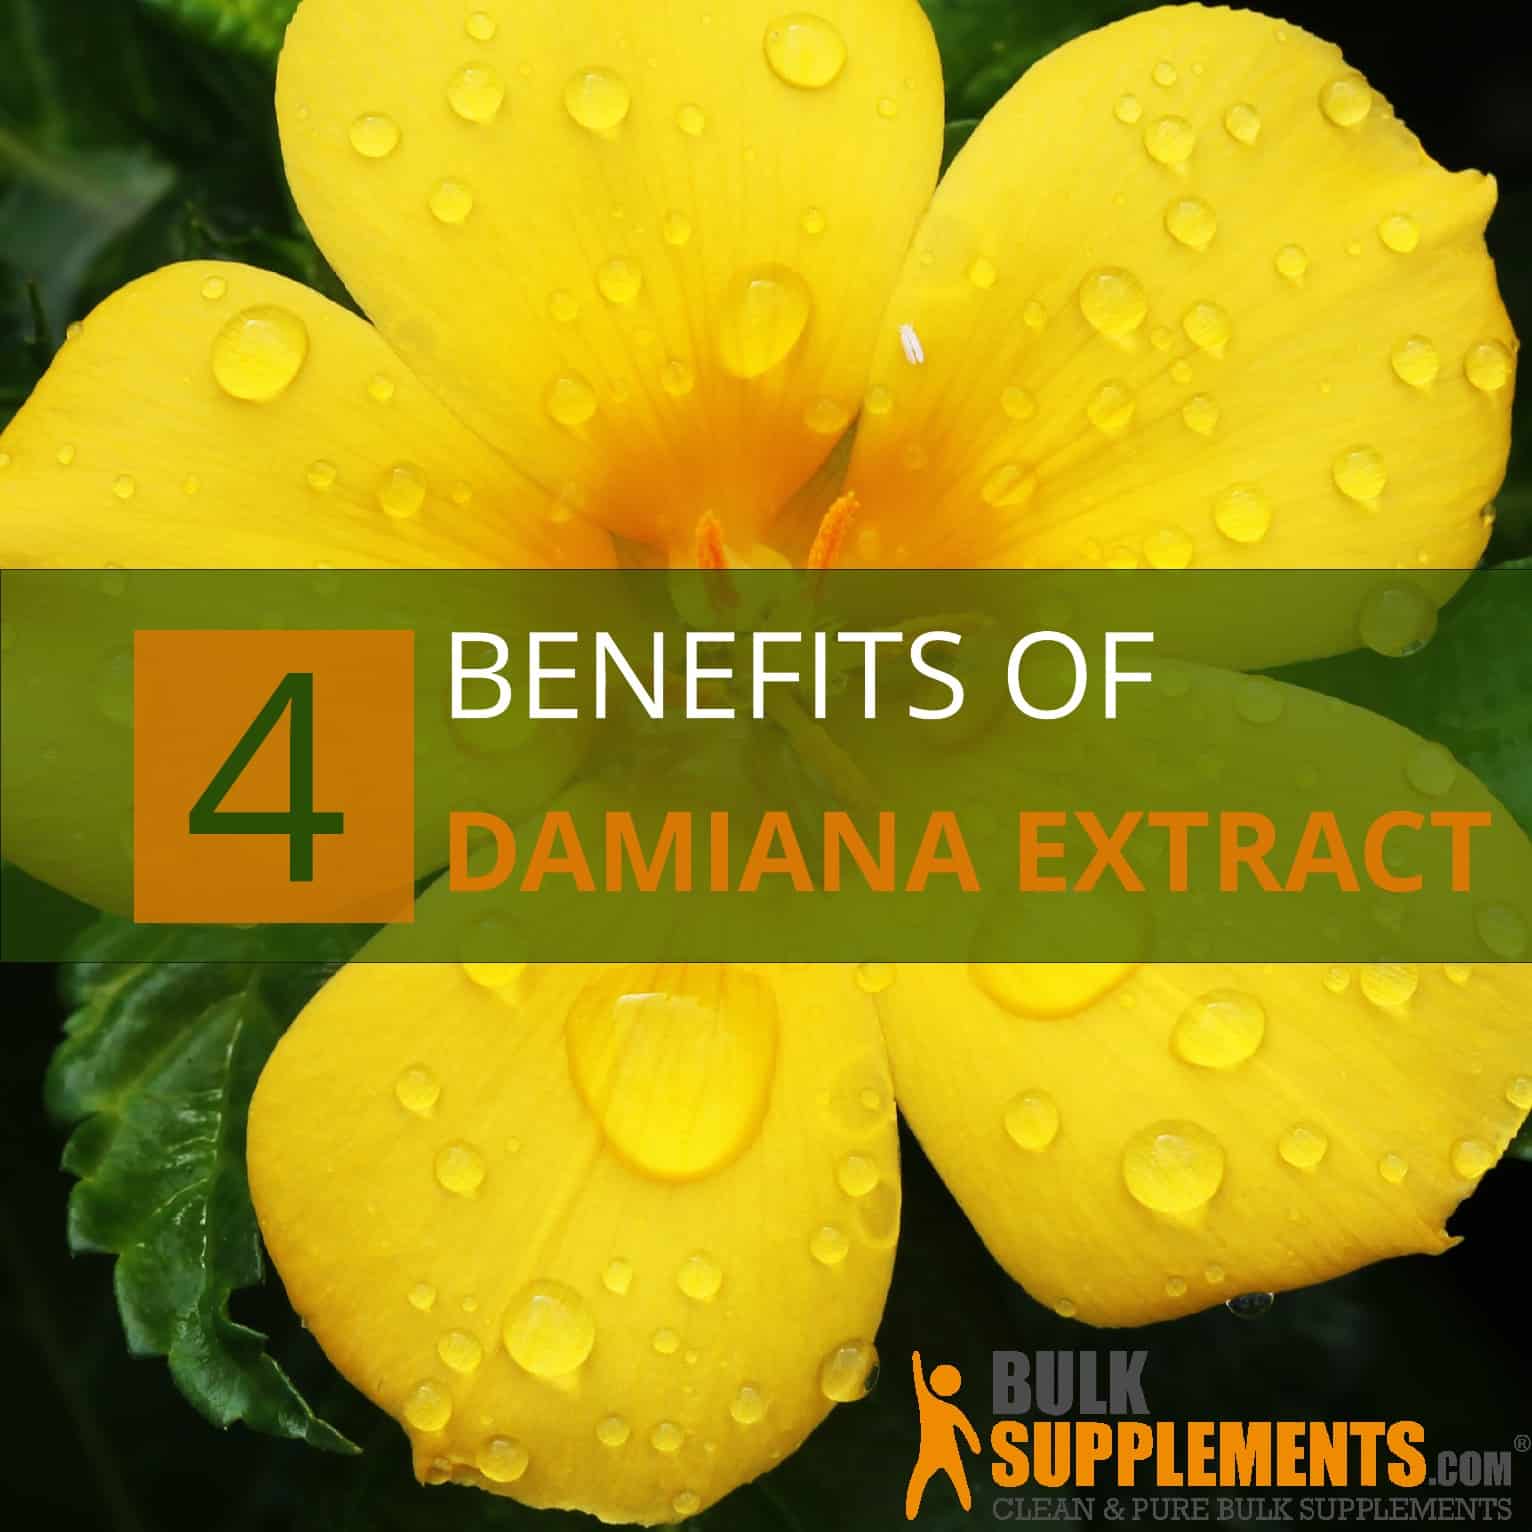 Is damiana good for anxiety?